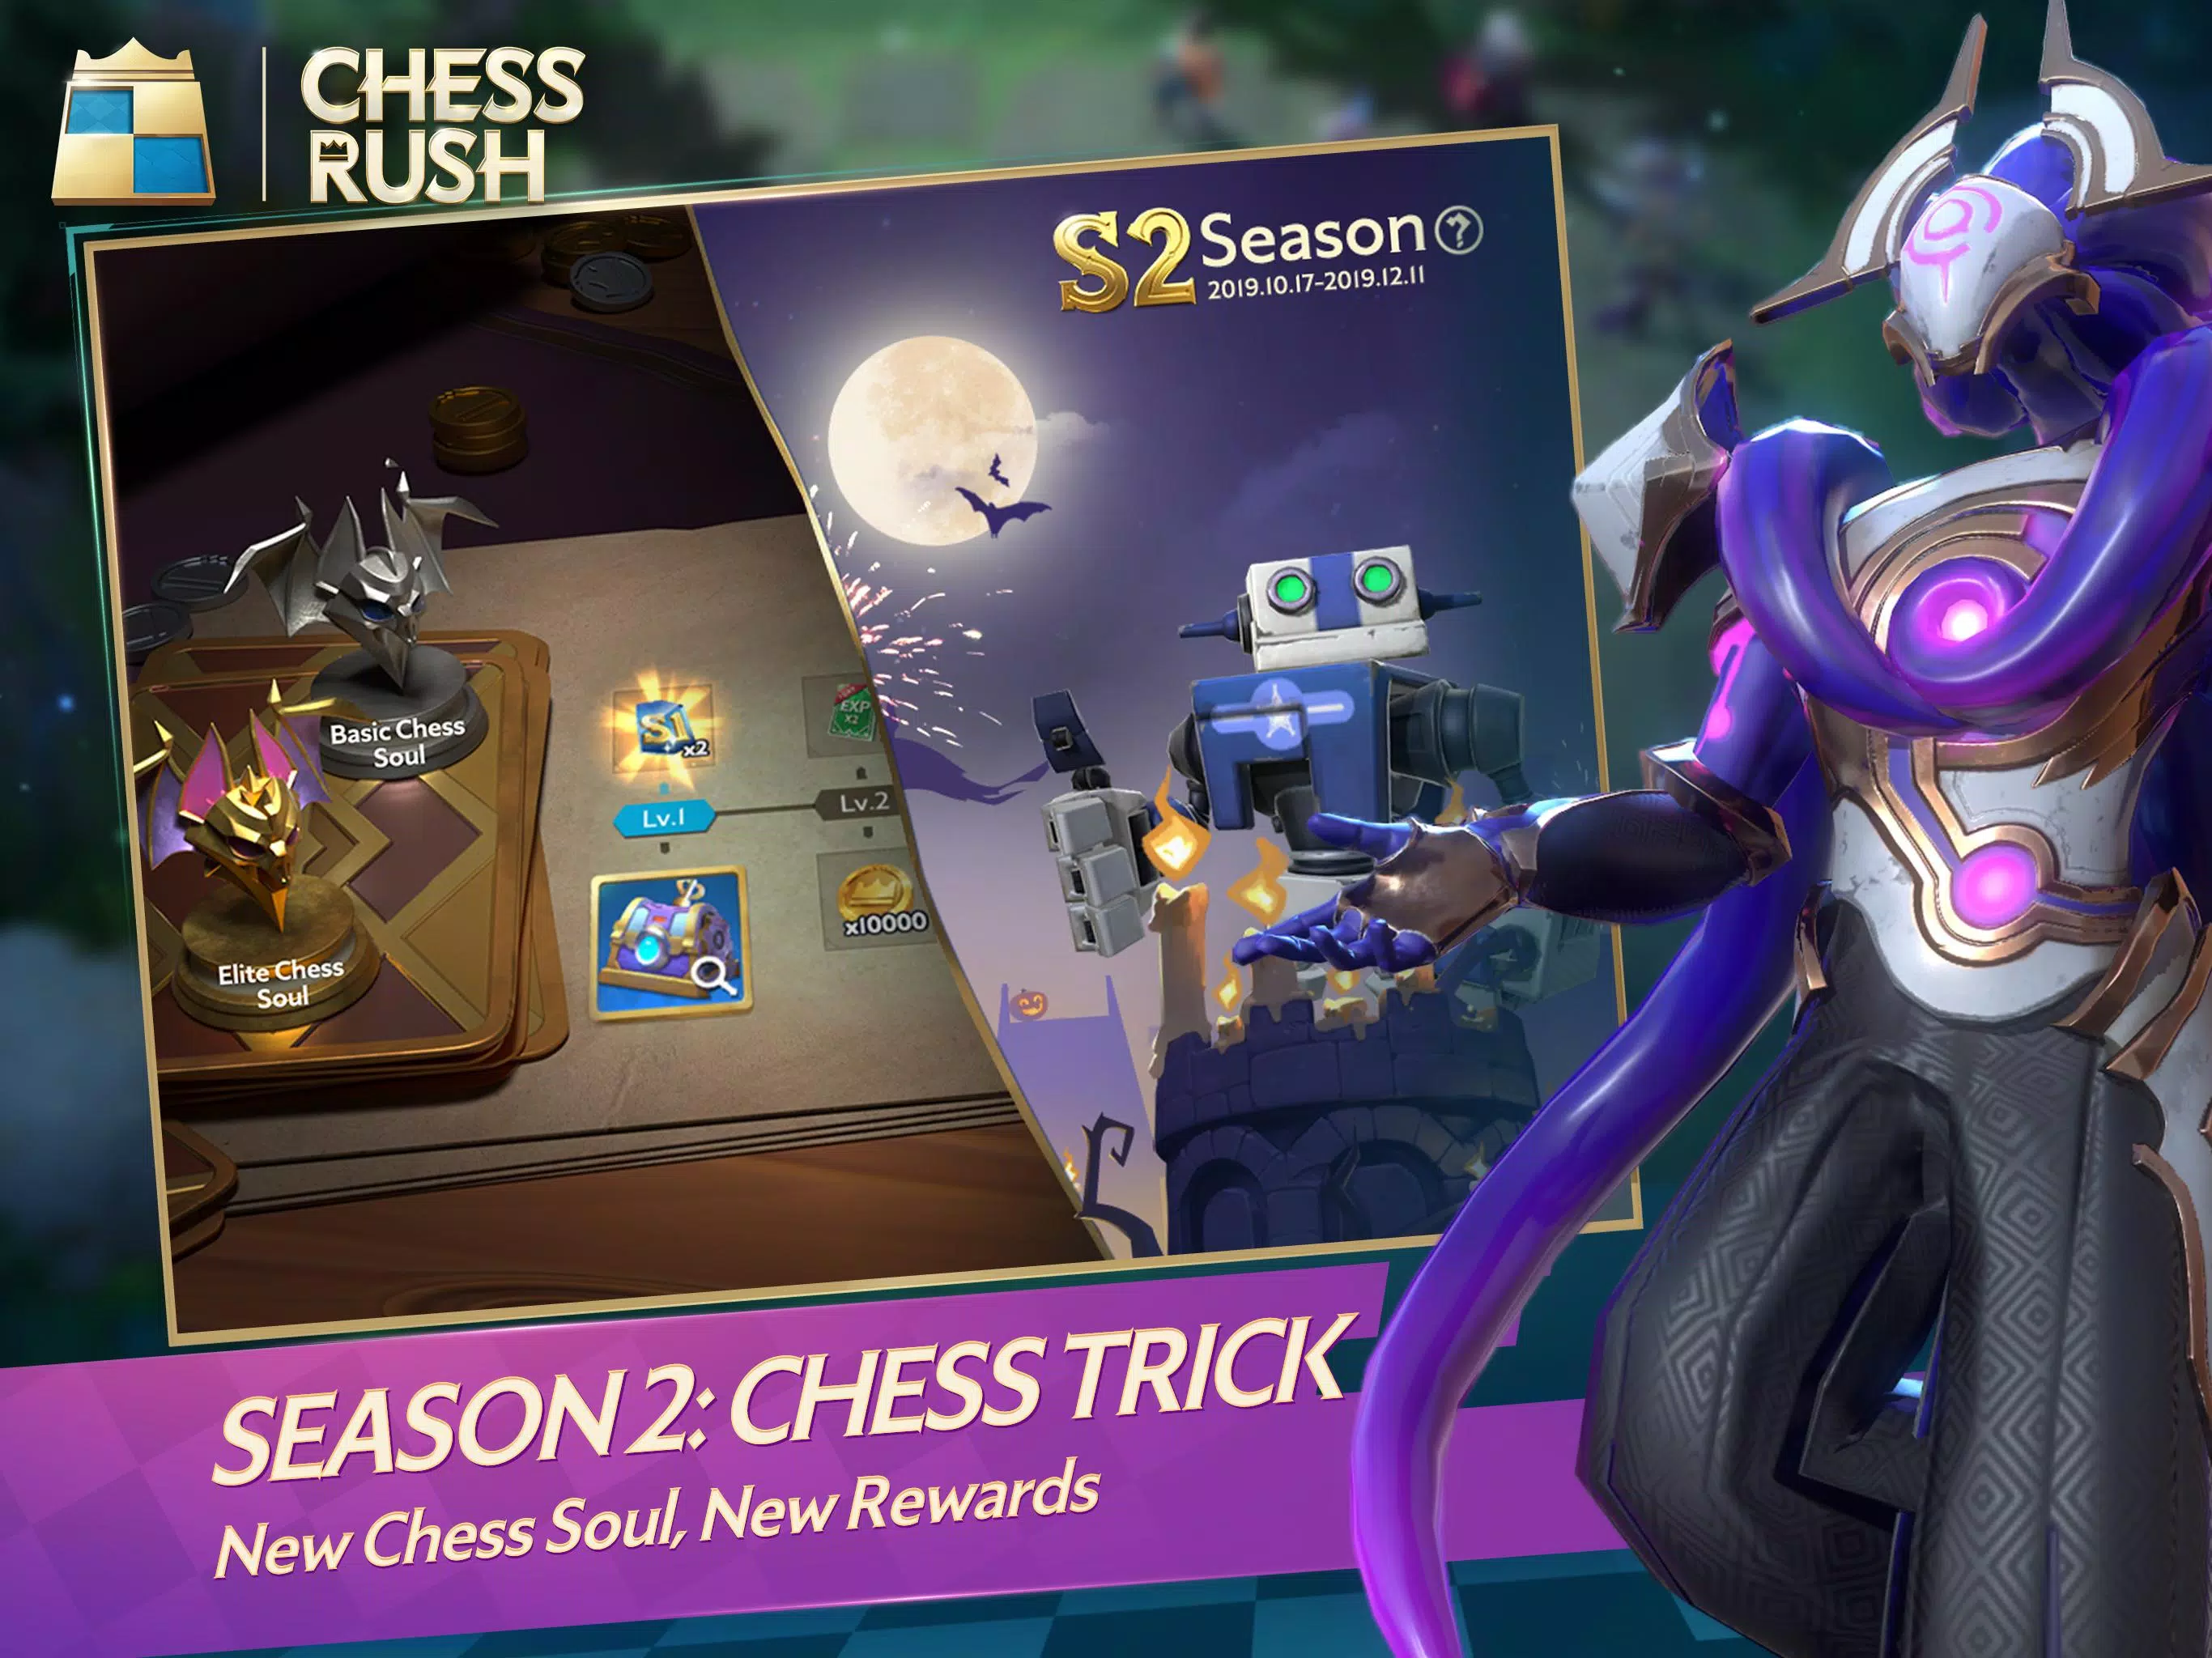 Chess Rush (Tencent) - Version 2.0 Gameplay (Android/IOS